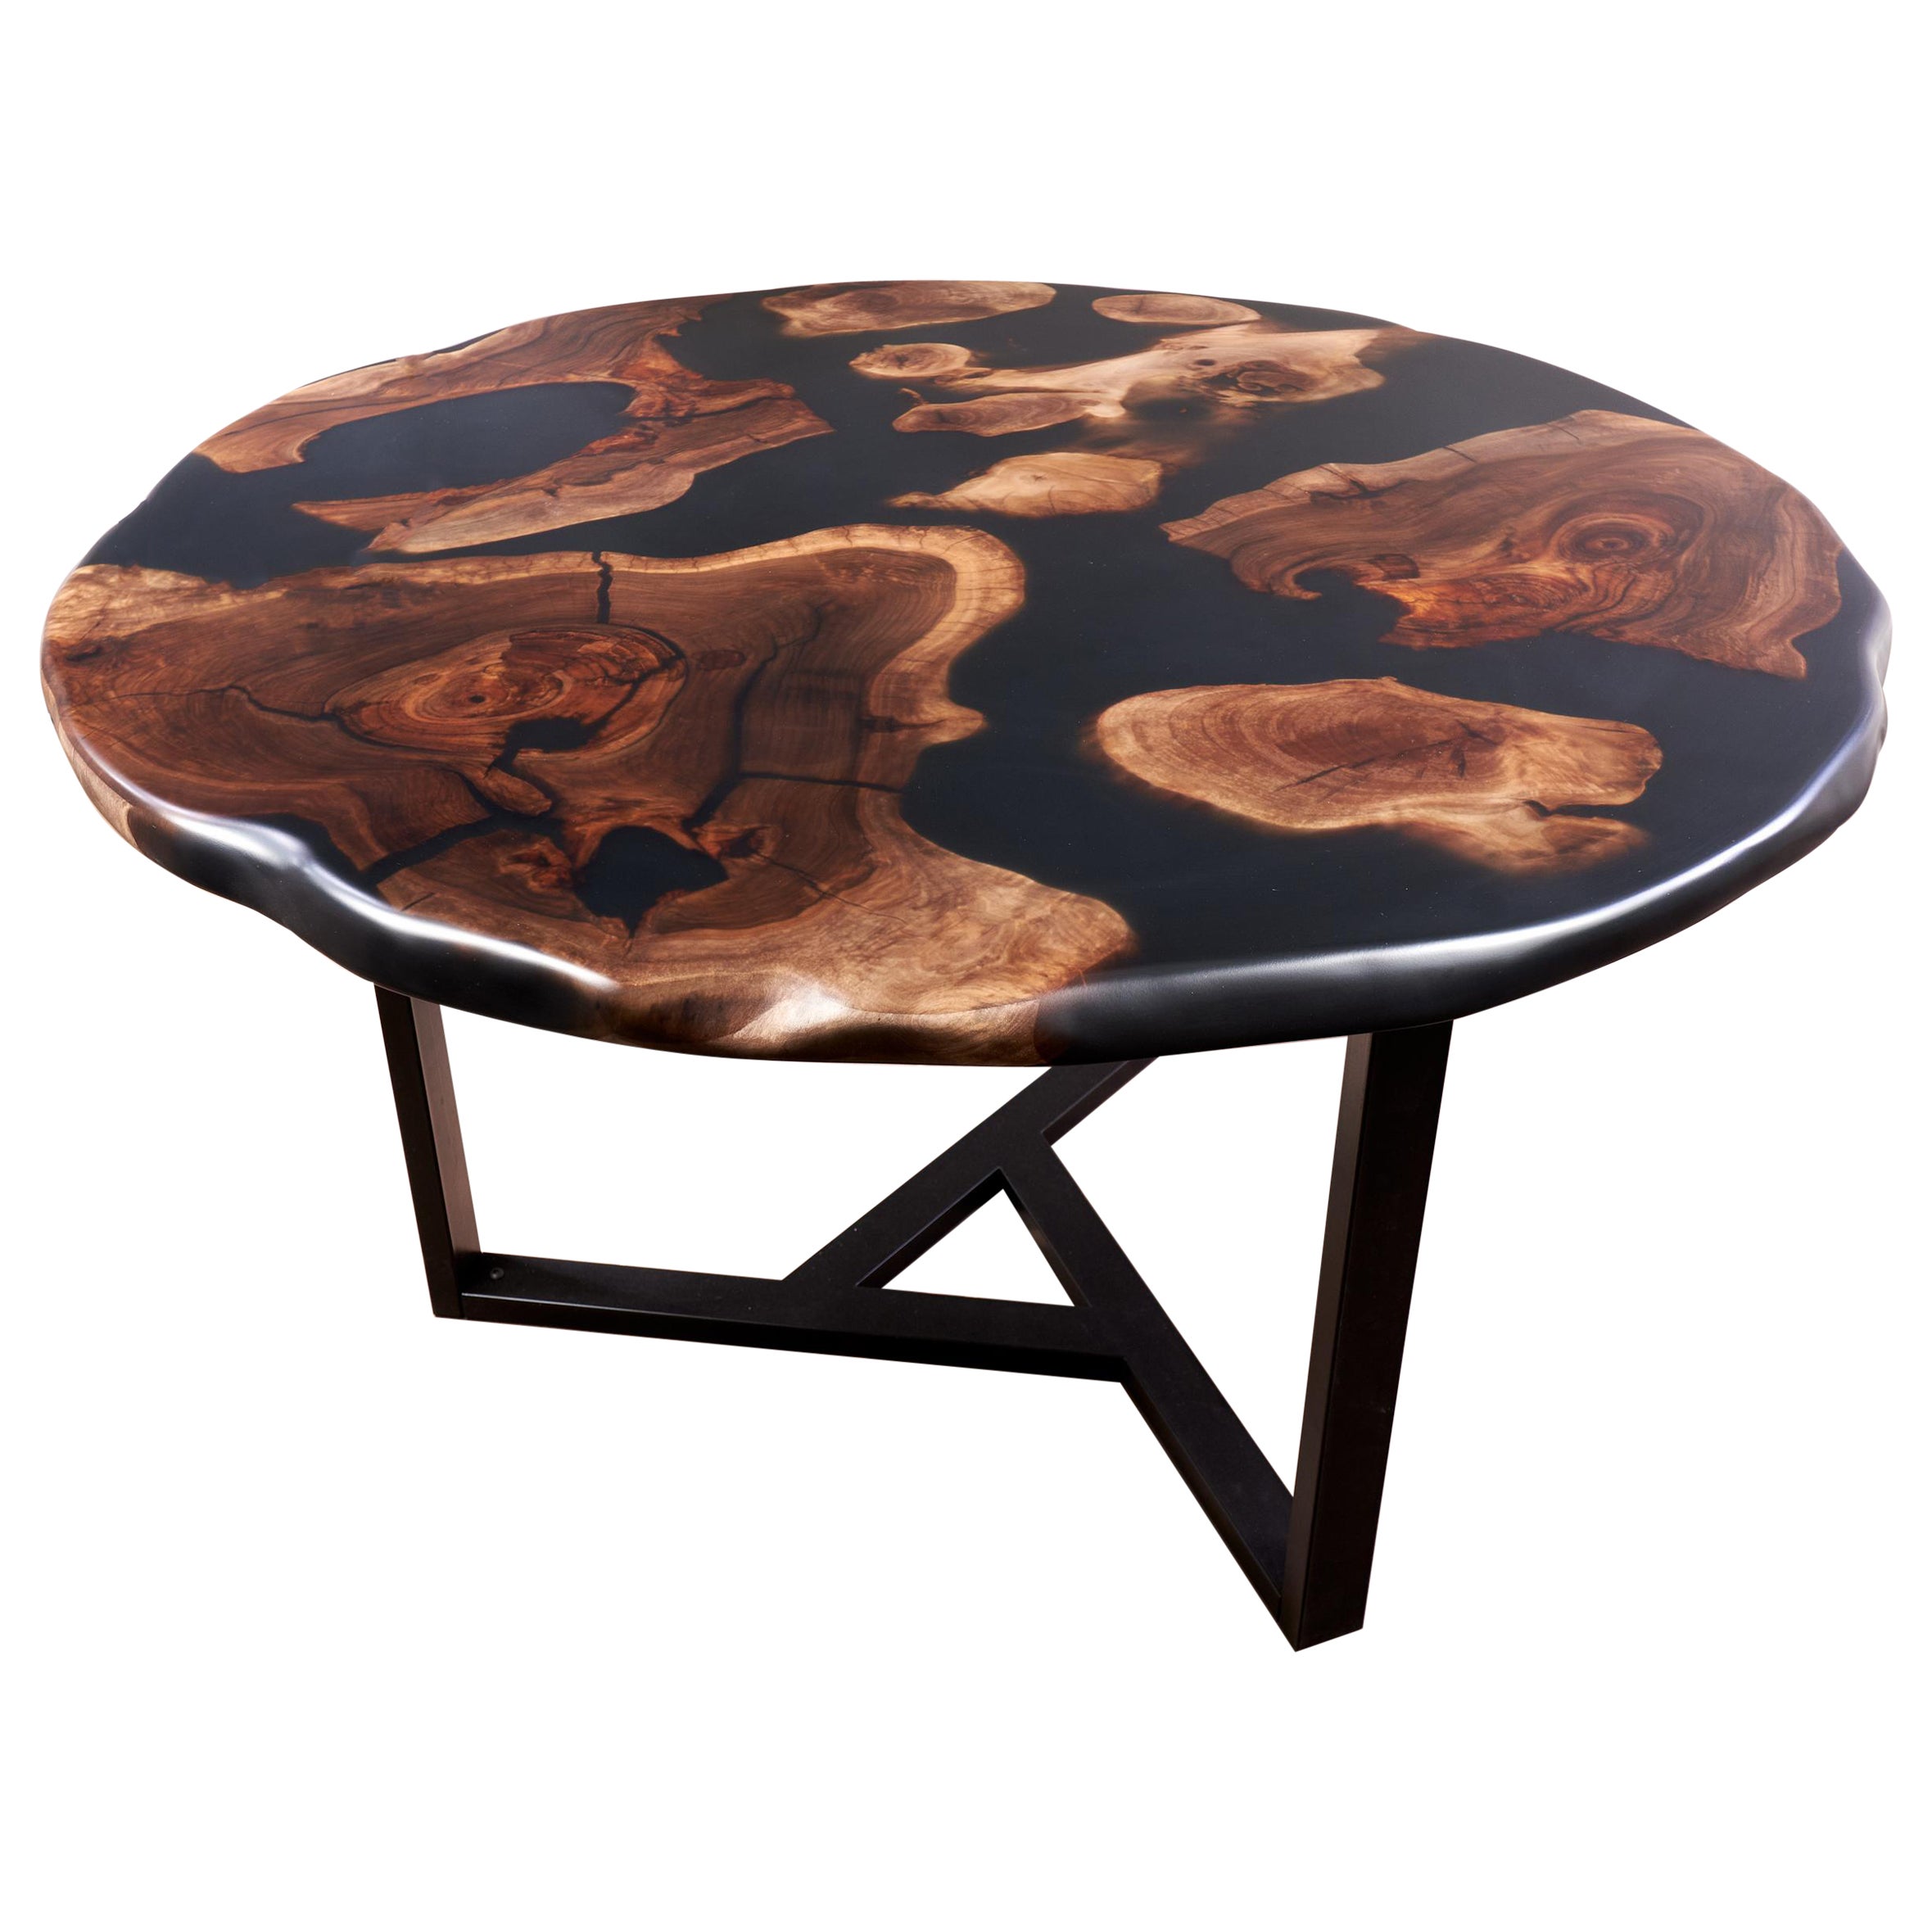 The RNSNCE Round Ancient Walnut Roots Live Edge Modern Handcrafted Dining Table For Sale